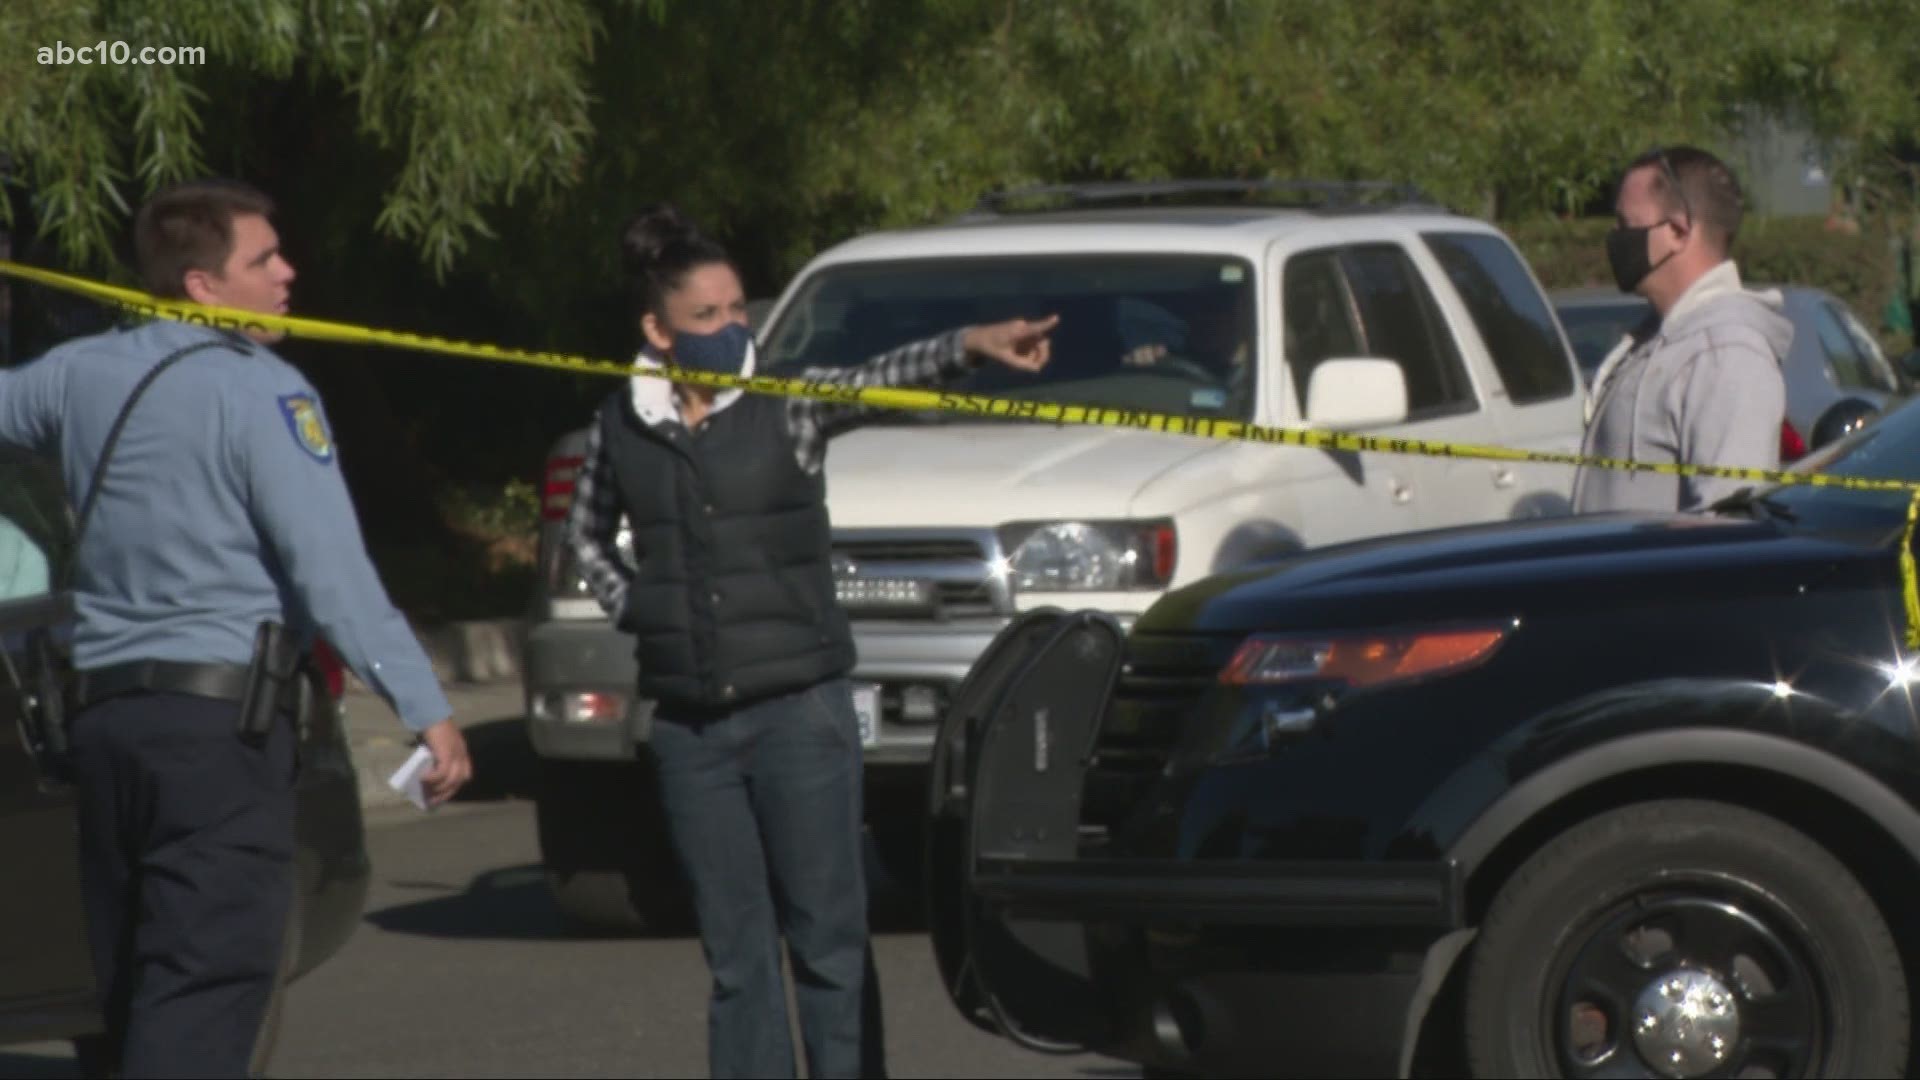 Investigators are still working through the details of a shooting at an apartment on Park City Court in Sacramento.